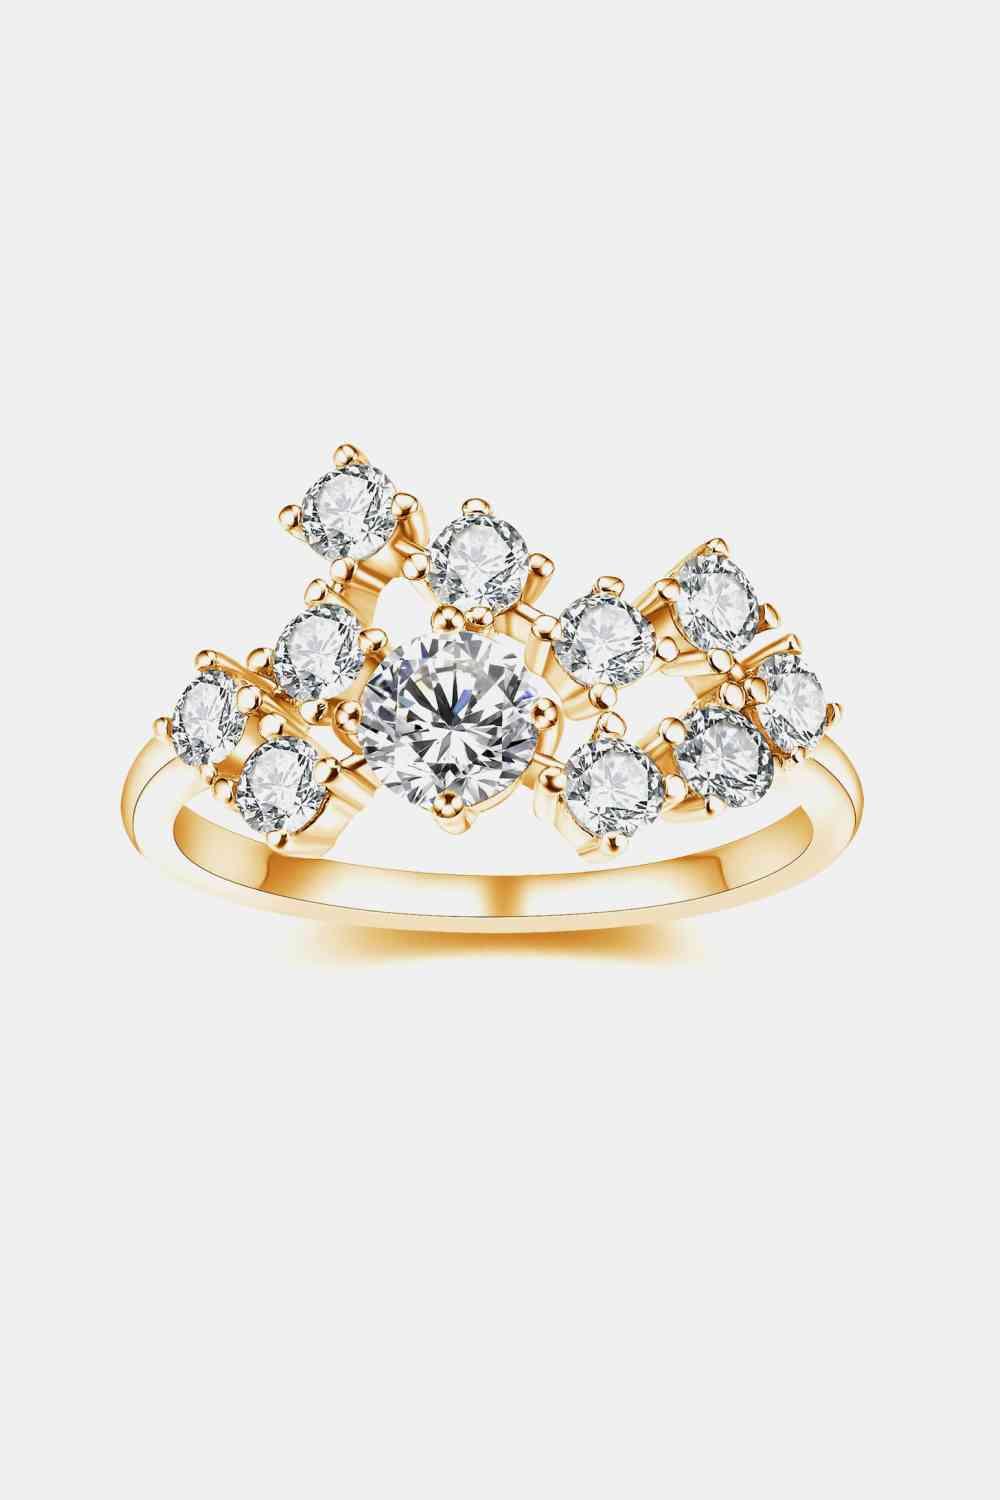 1.2 Carat Moissanite 925 Sterling Silver Ring | Sugarz Chique Boutique